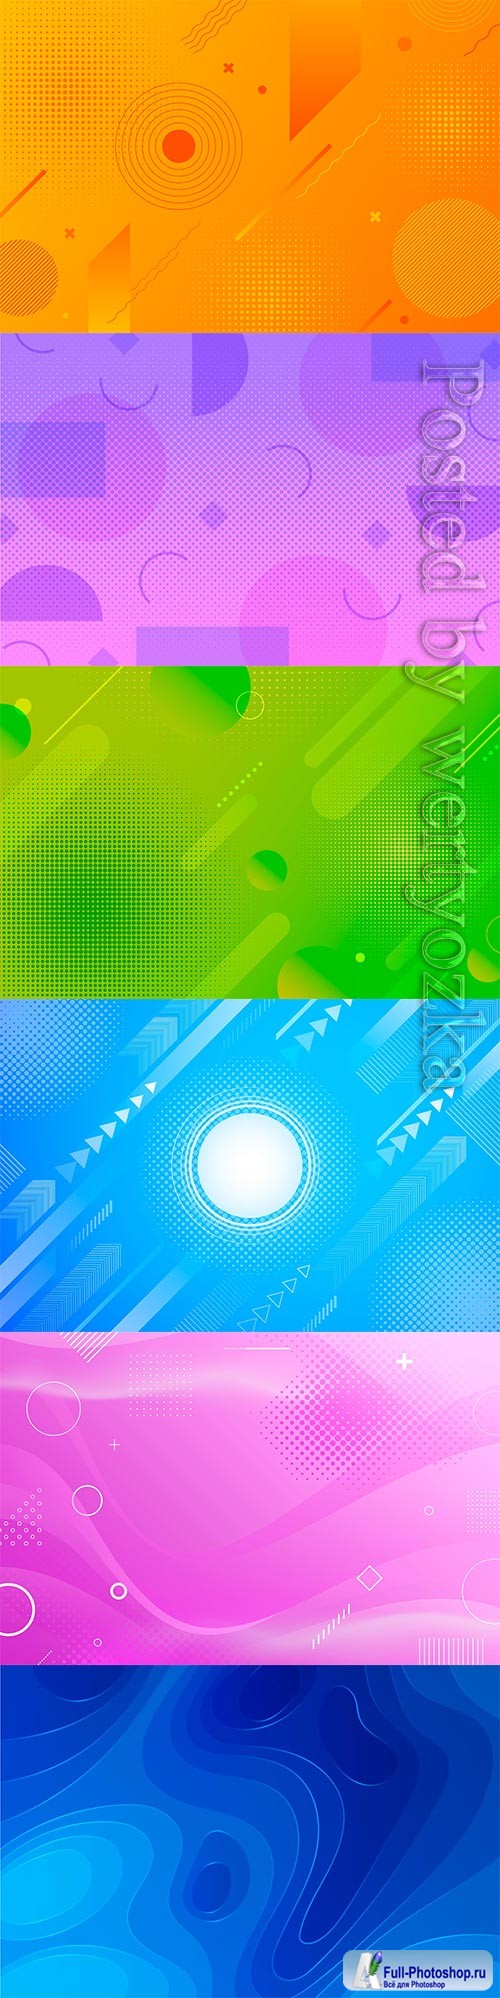 Abstract halftone vector background